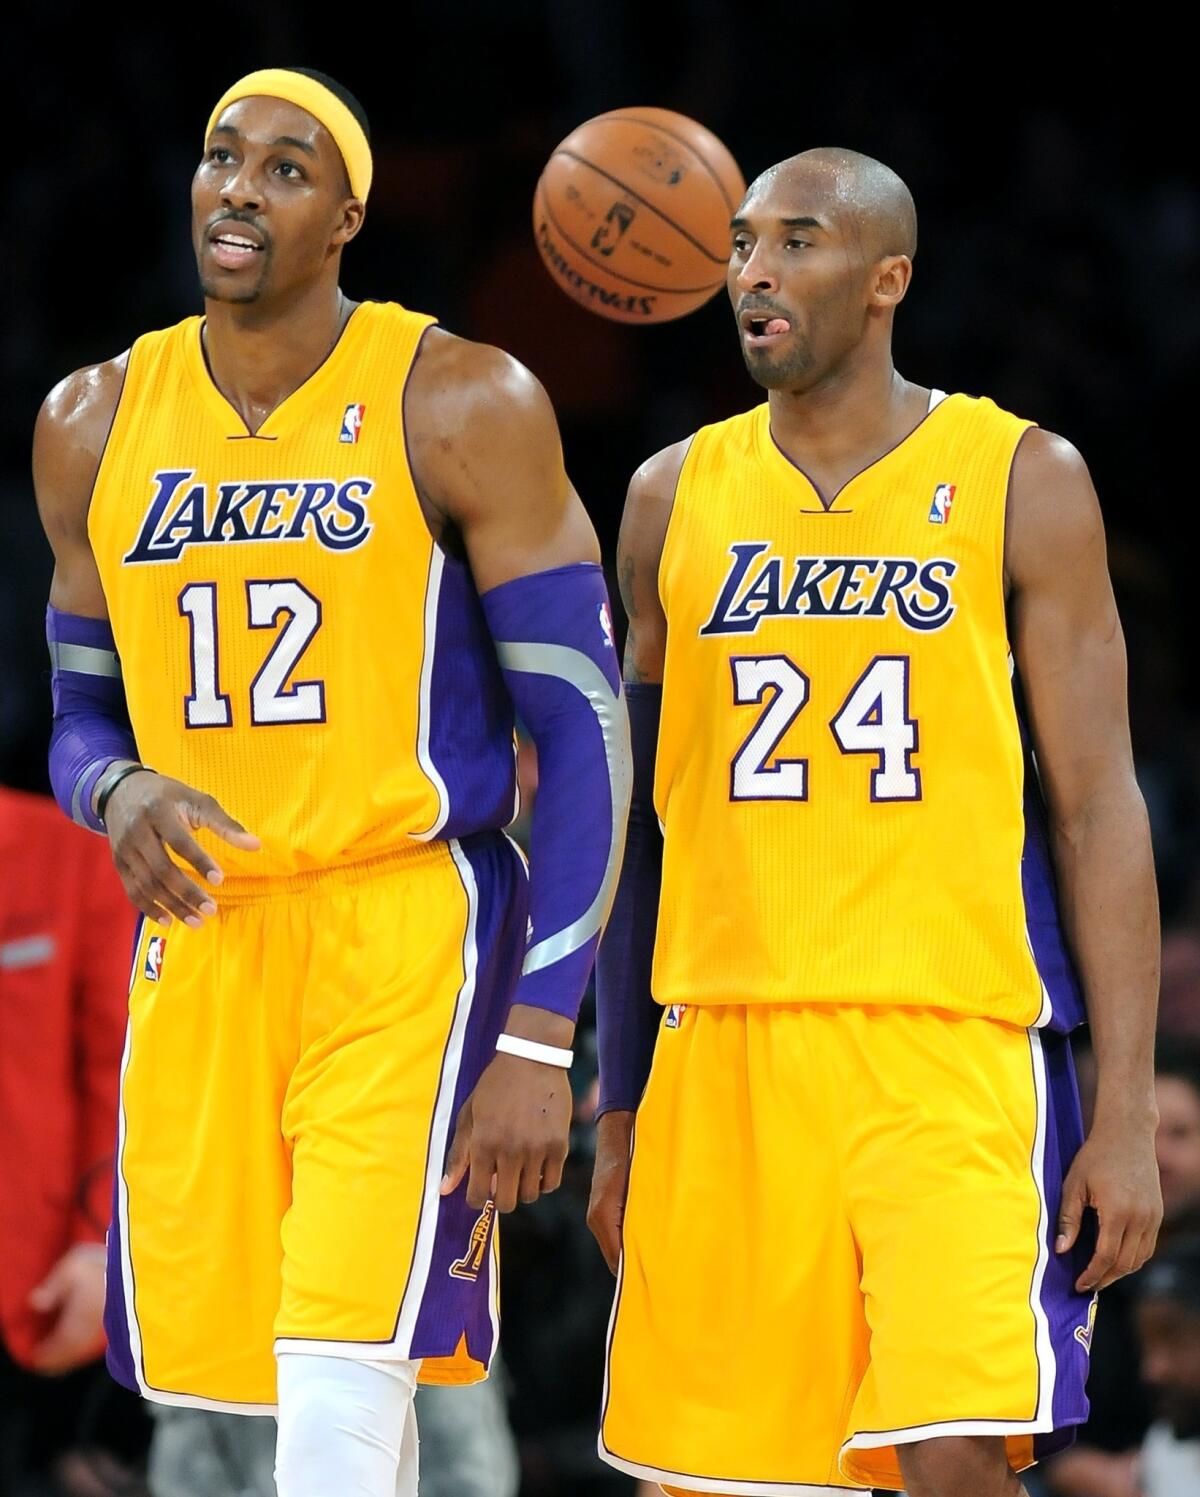 Lakers star Kobe Bryant, right, only had good things to say Thursday about former teammate and current Houston Rockets center Dwight Howard.